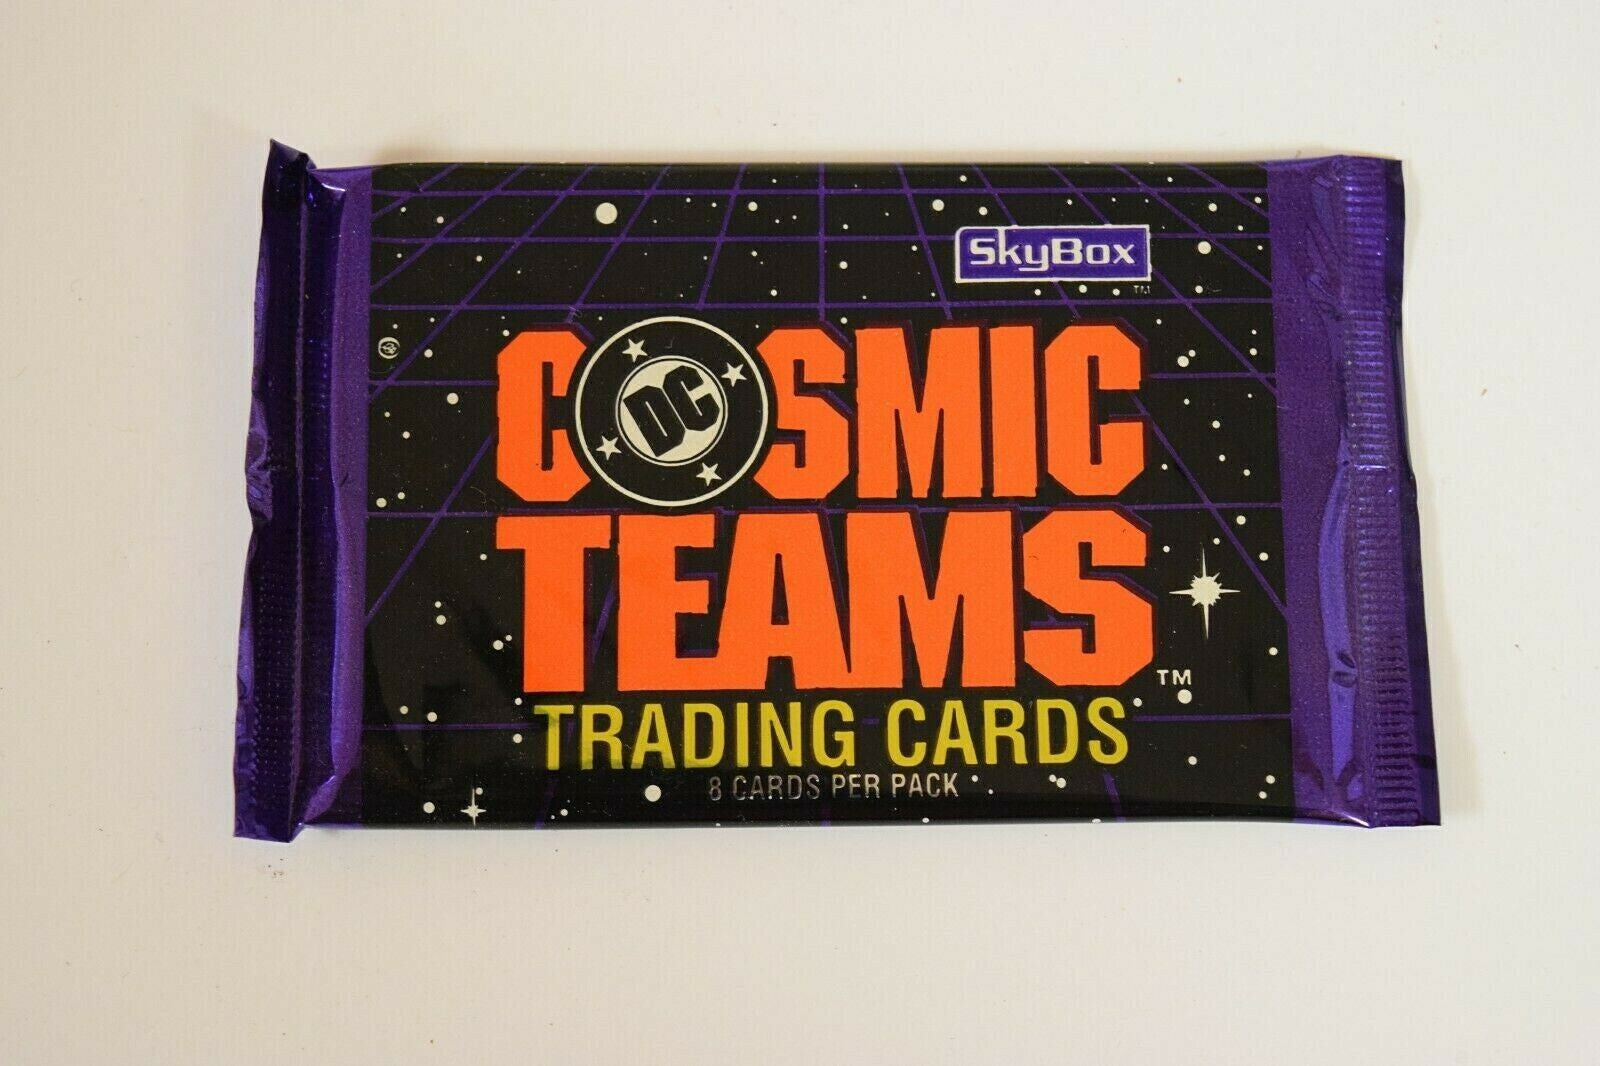 1993 Skybox DC Cosmic Teams Trading Cards Wax Pack (8 Cards Per Pack)